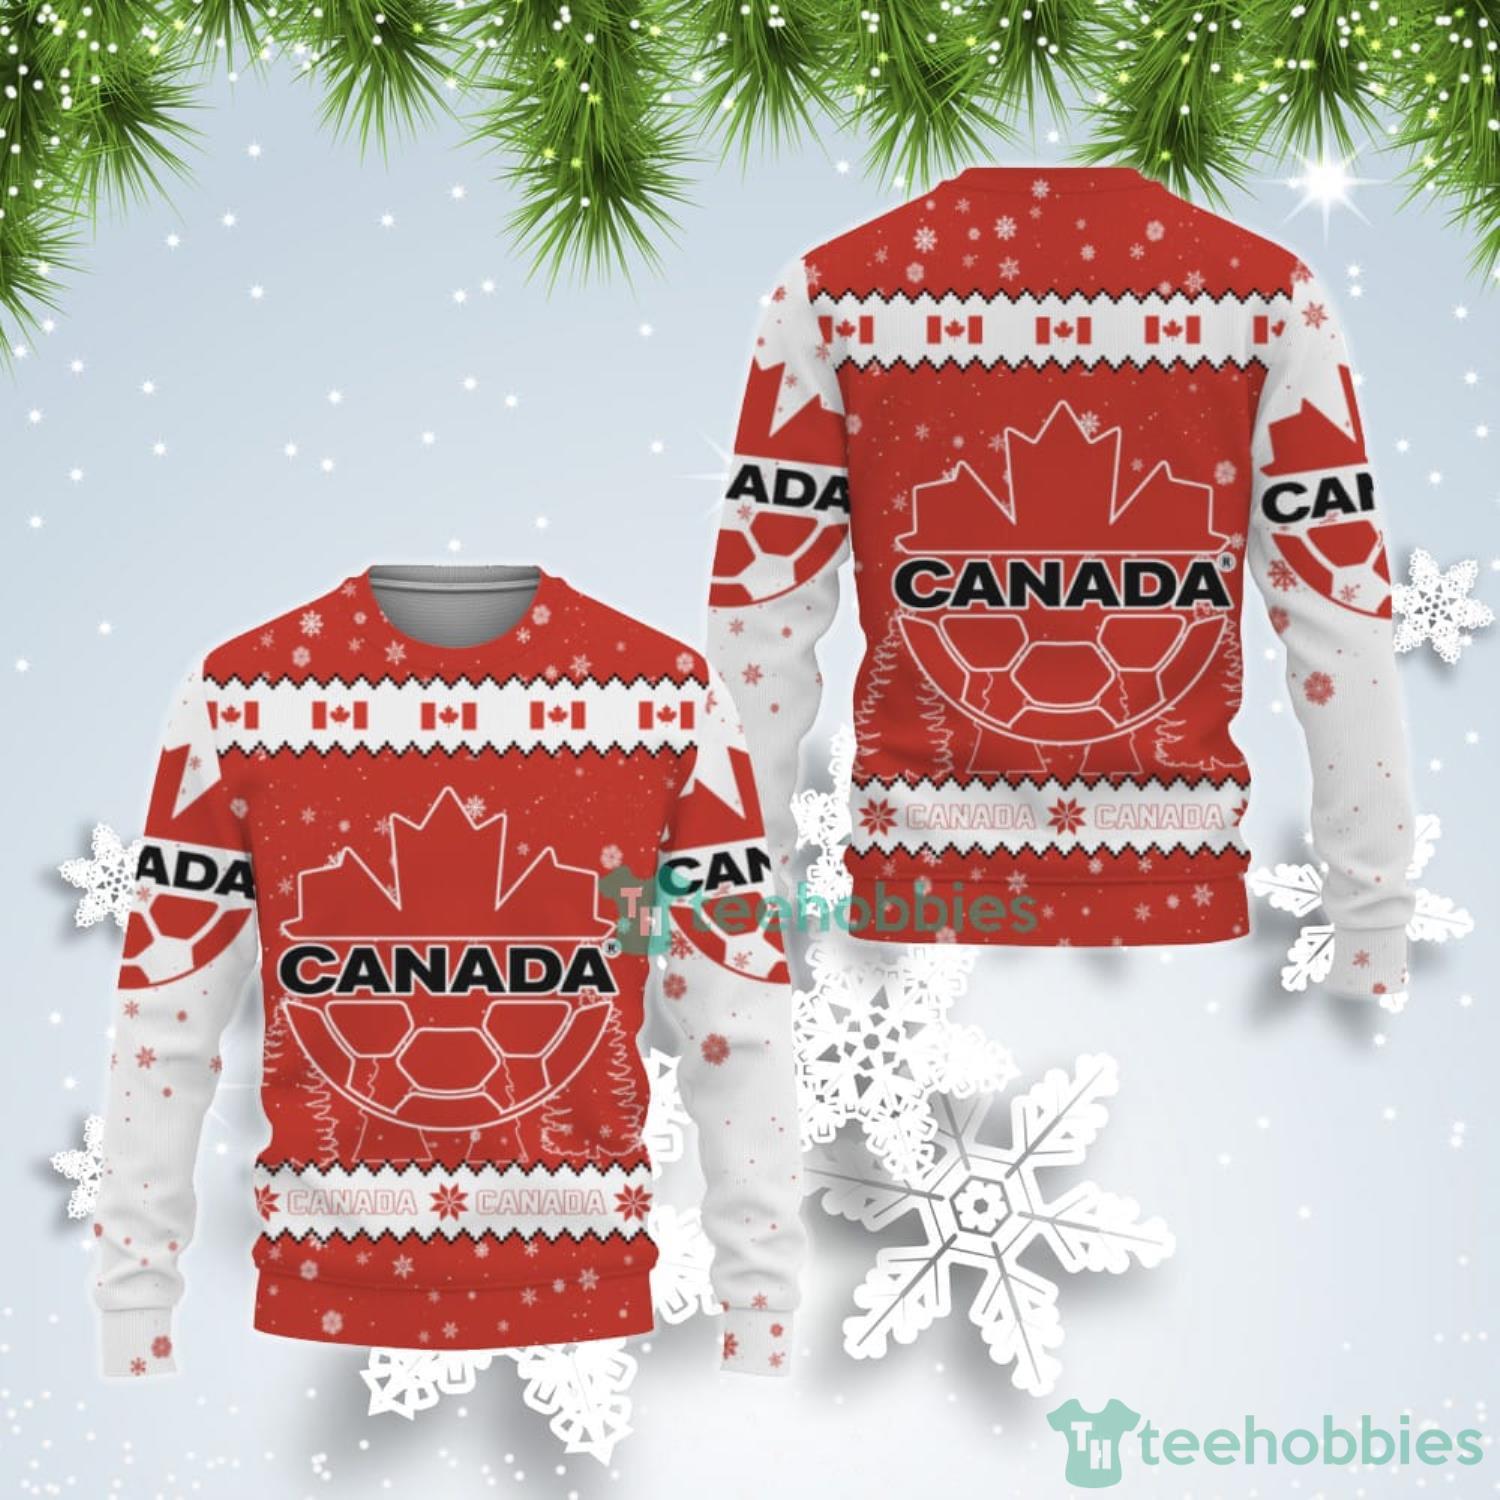 Canada National Soccer Team Qatar World Cup 2022 Winter Season Ugly Christmas Sweater Product Photo 1